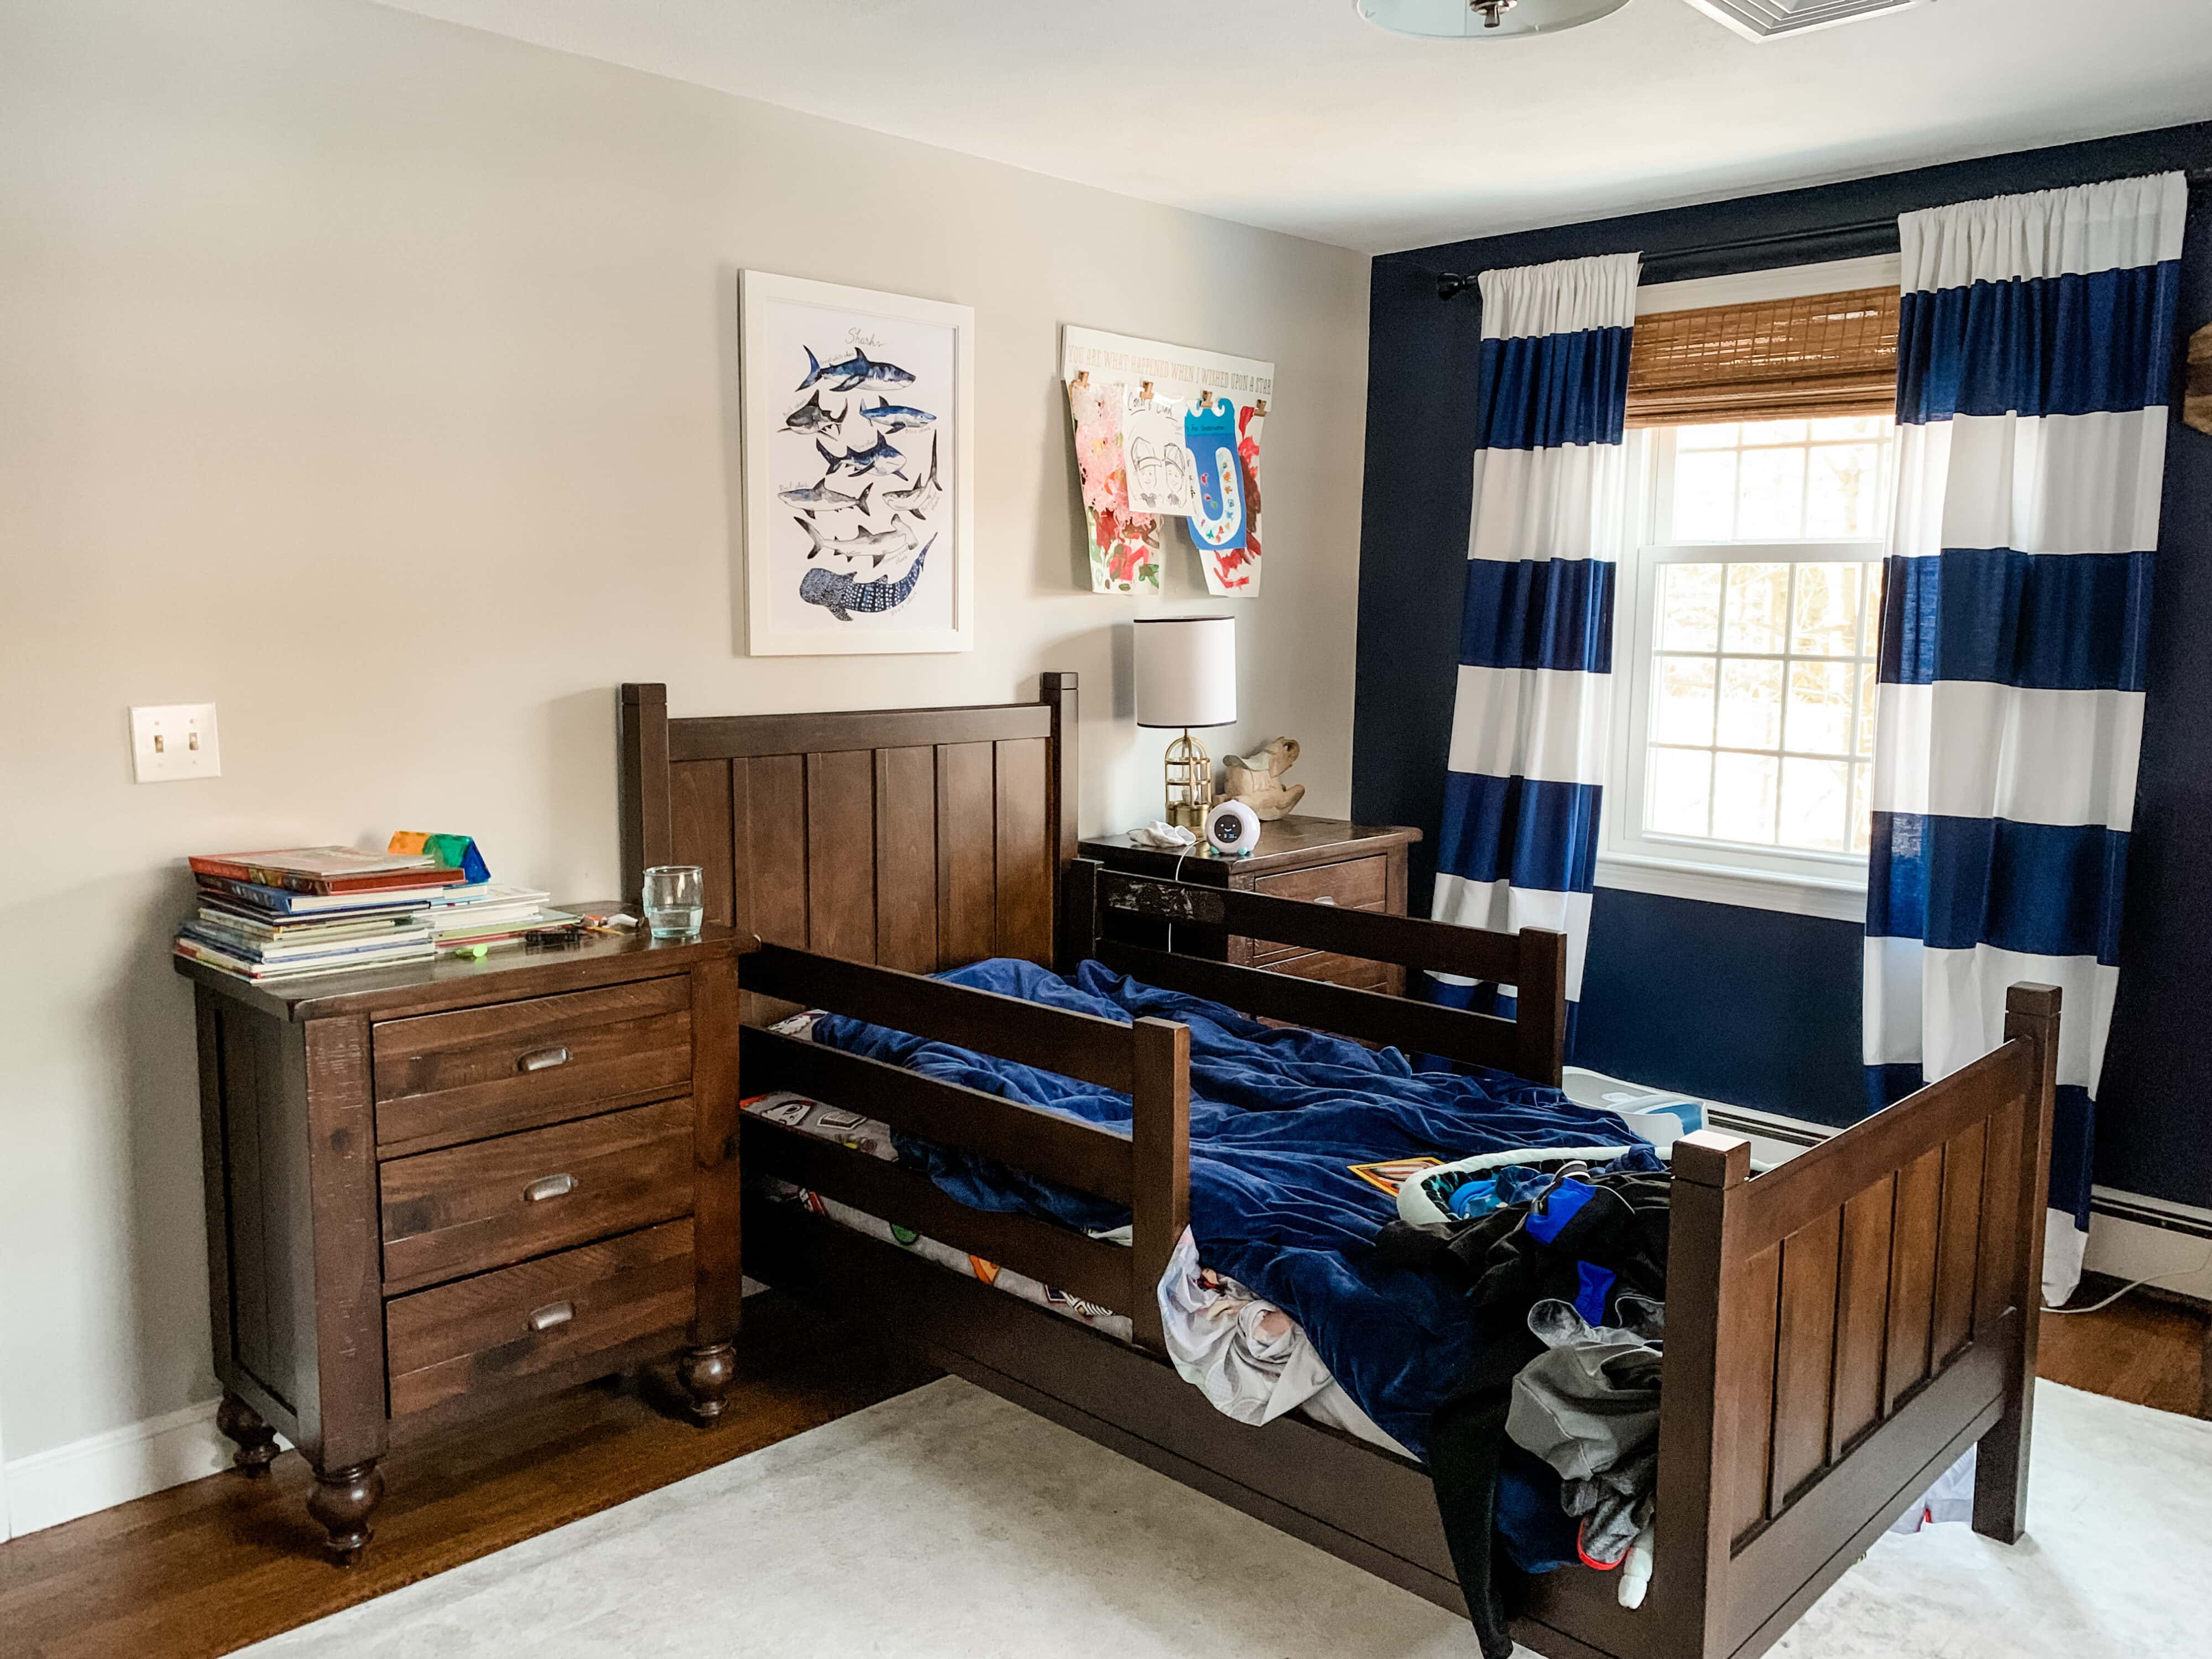 Toddler Bedroom Before - gray walls, navy accent wall and dark wood furniture